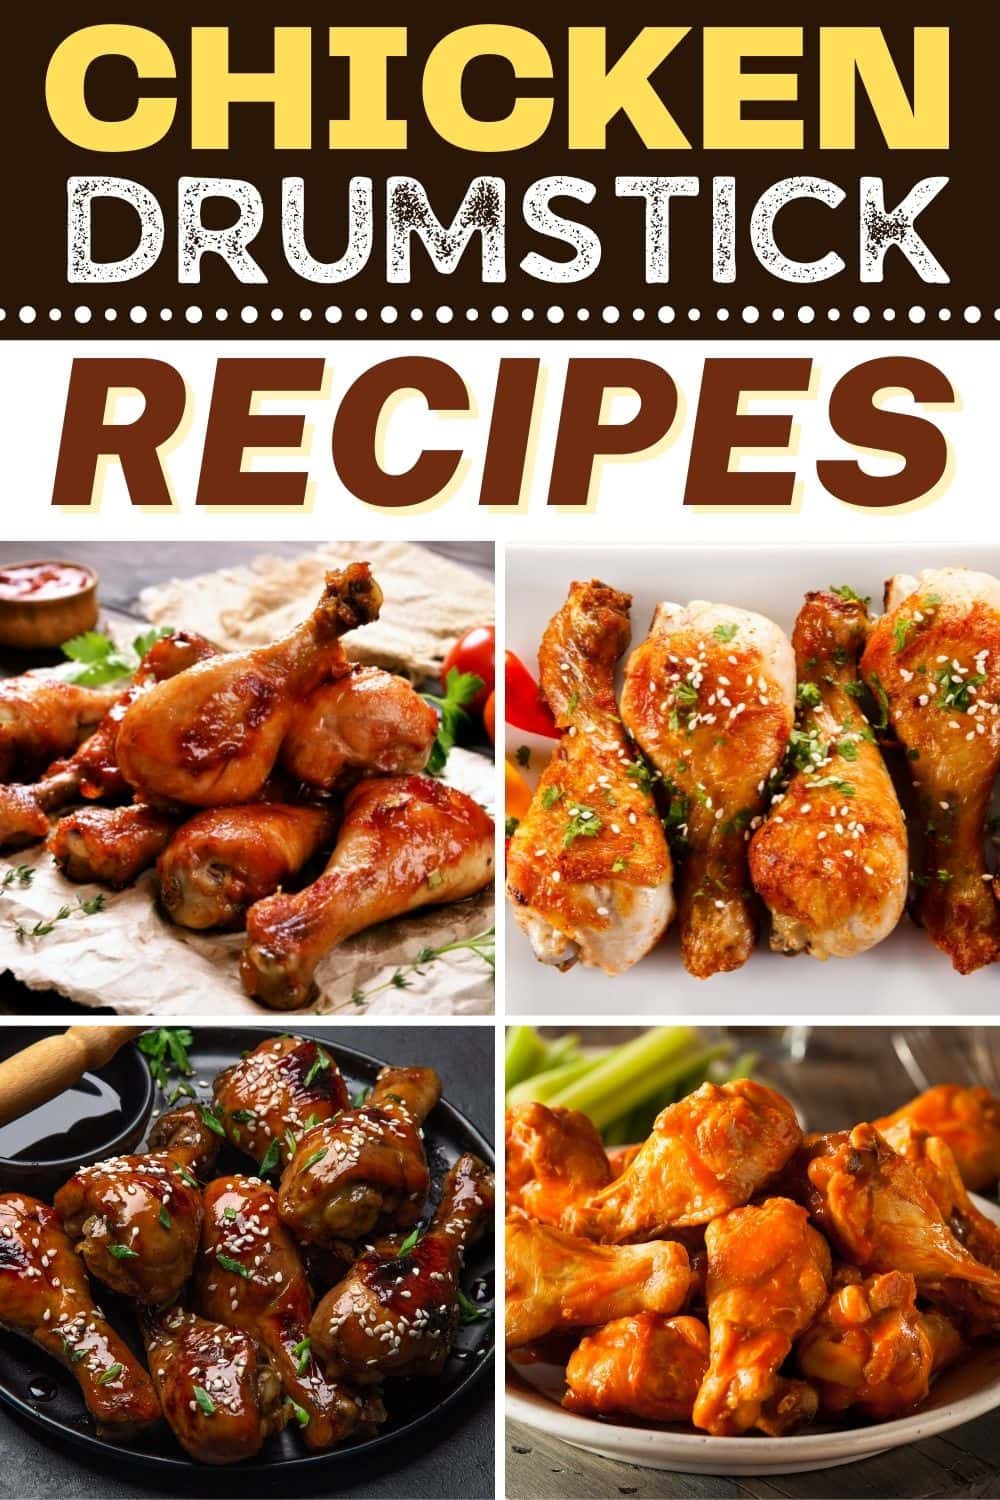 20 Easy Chicken Drumstick Recipes Guaranteed to Satisfy - Insanely Good